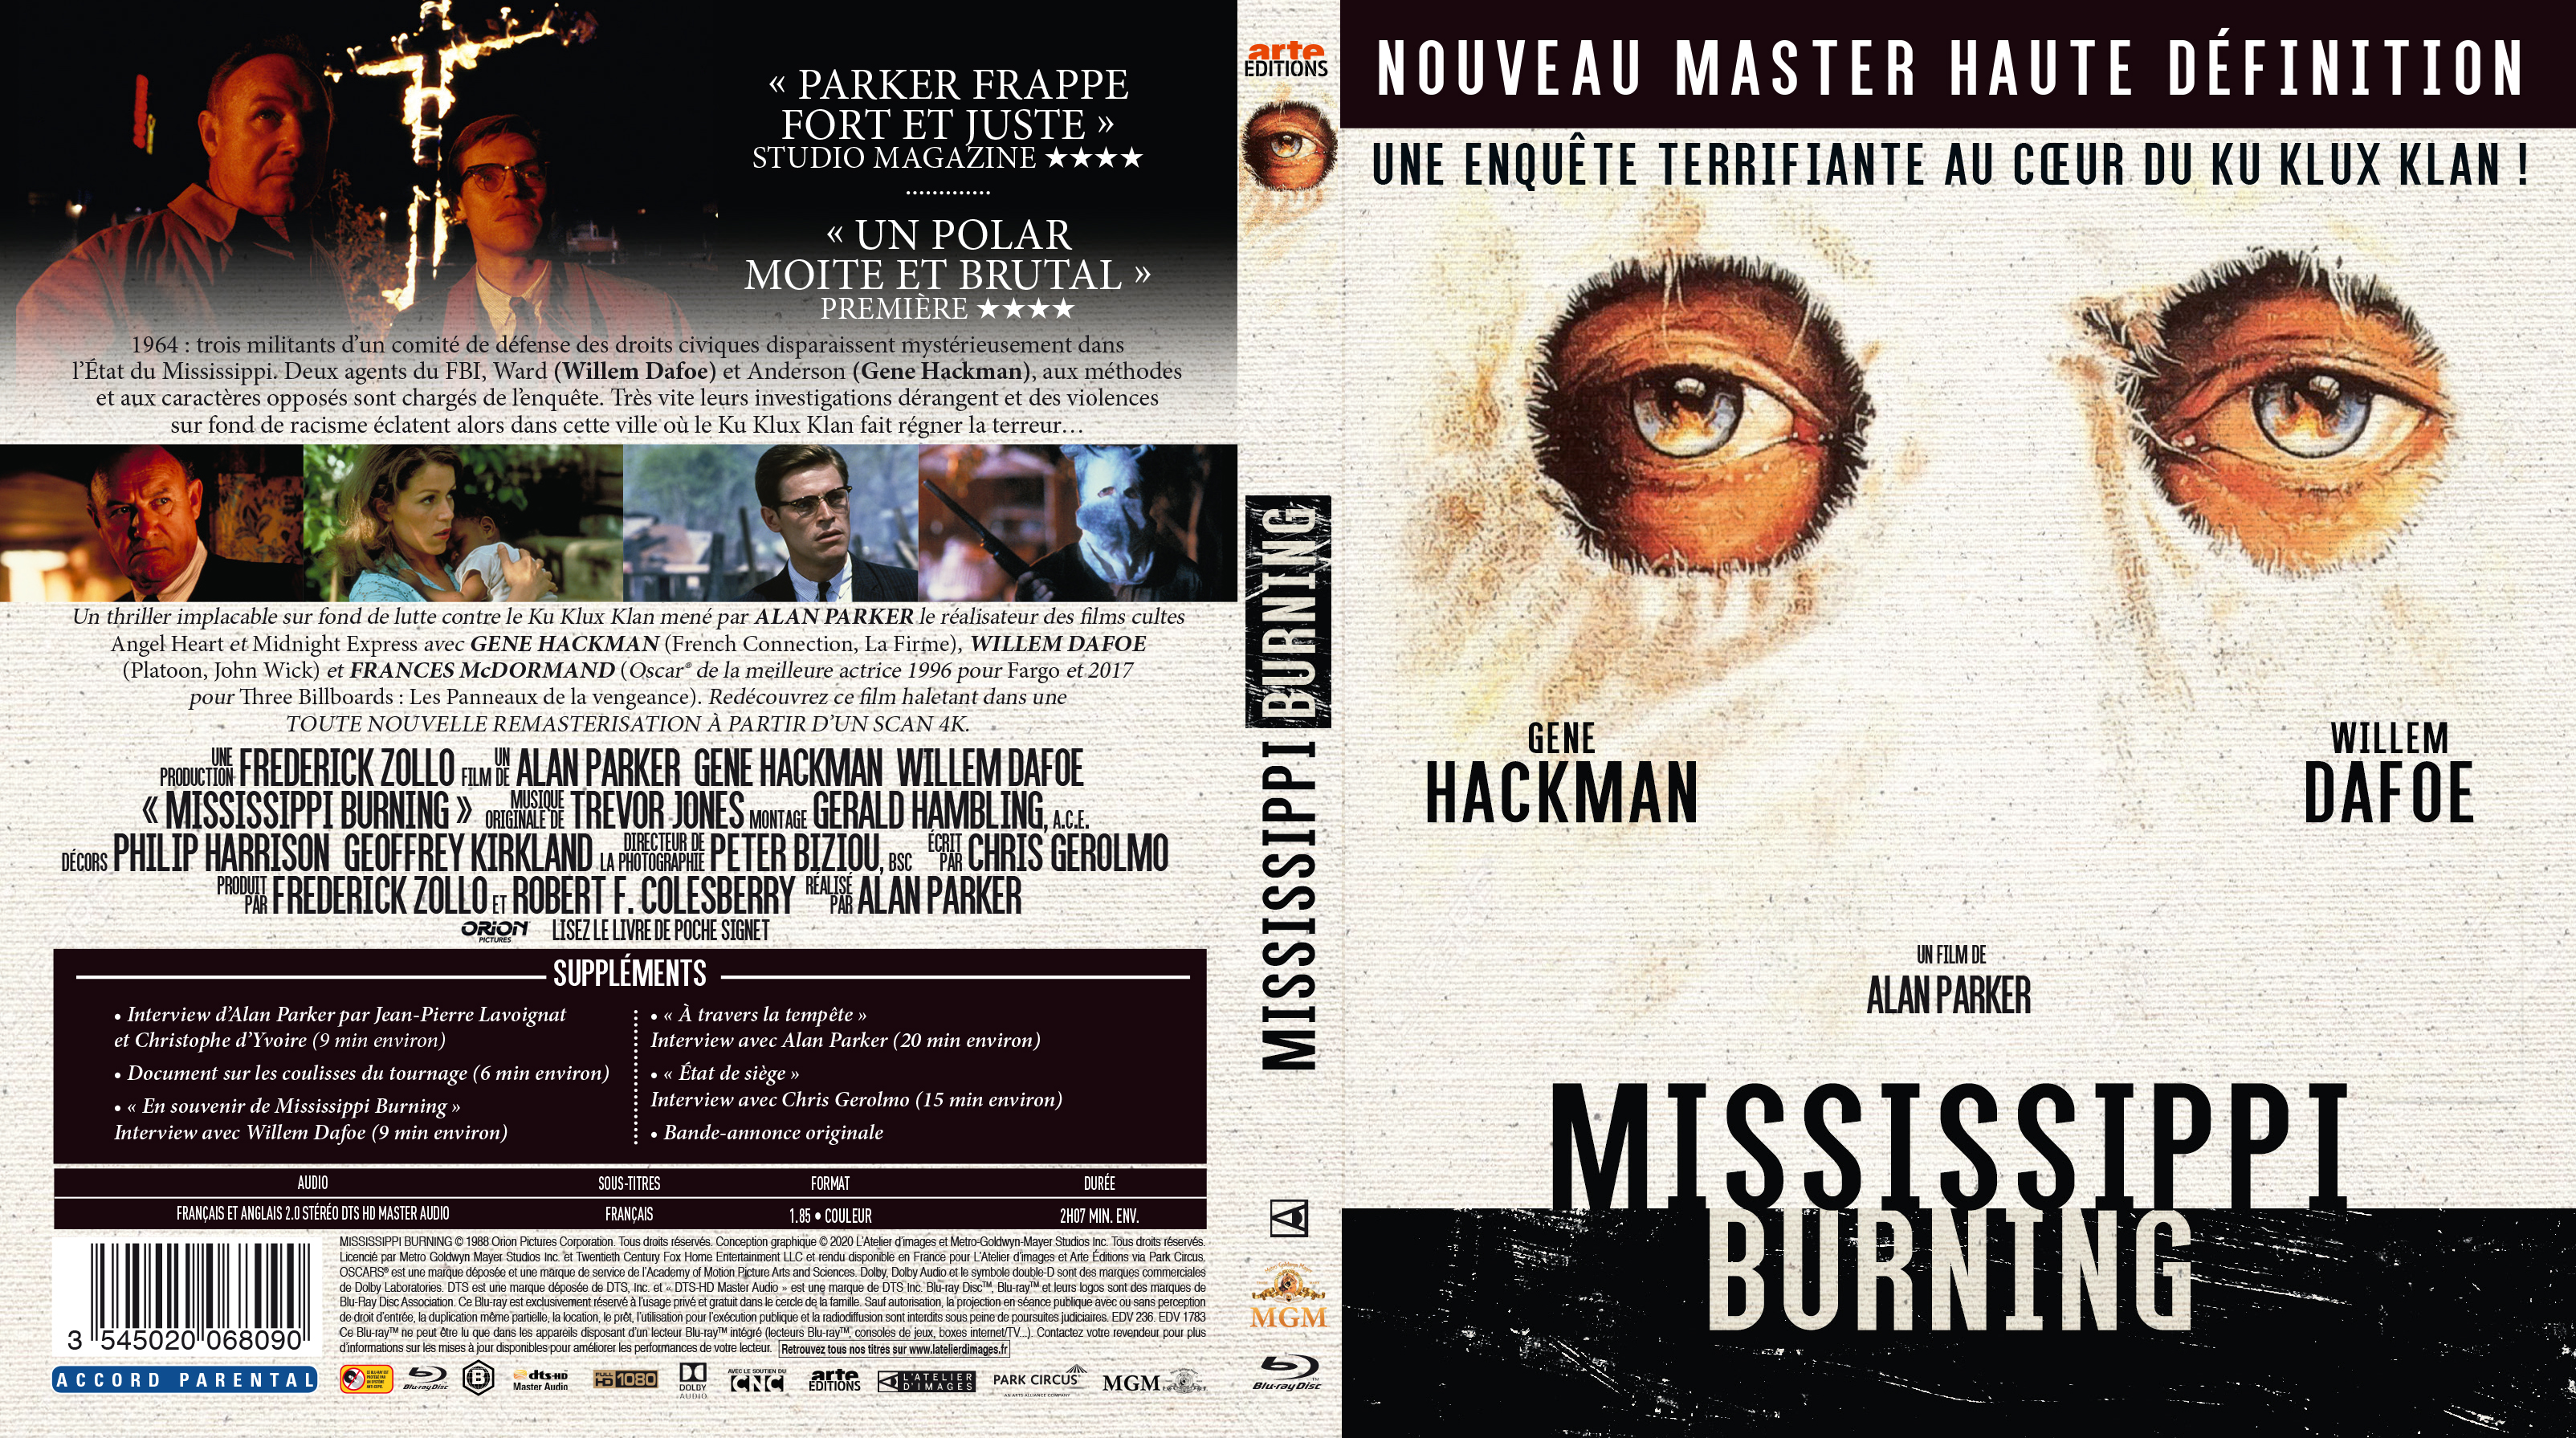 Jaquette DVD Mississippi burning (BLU-RAY)